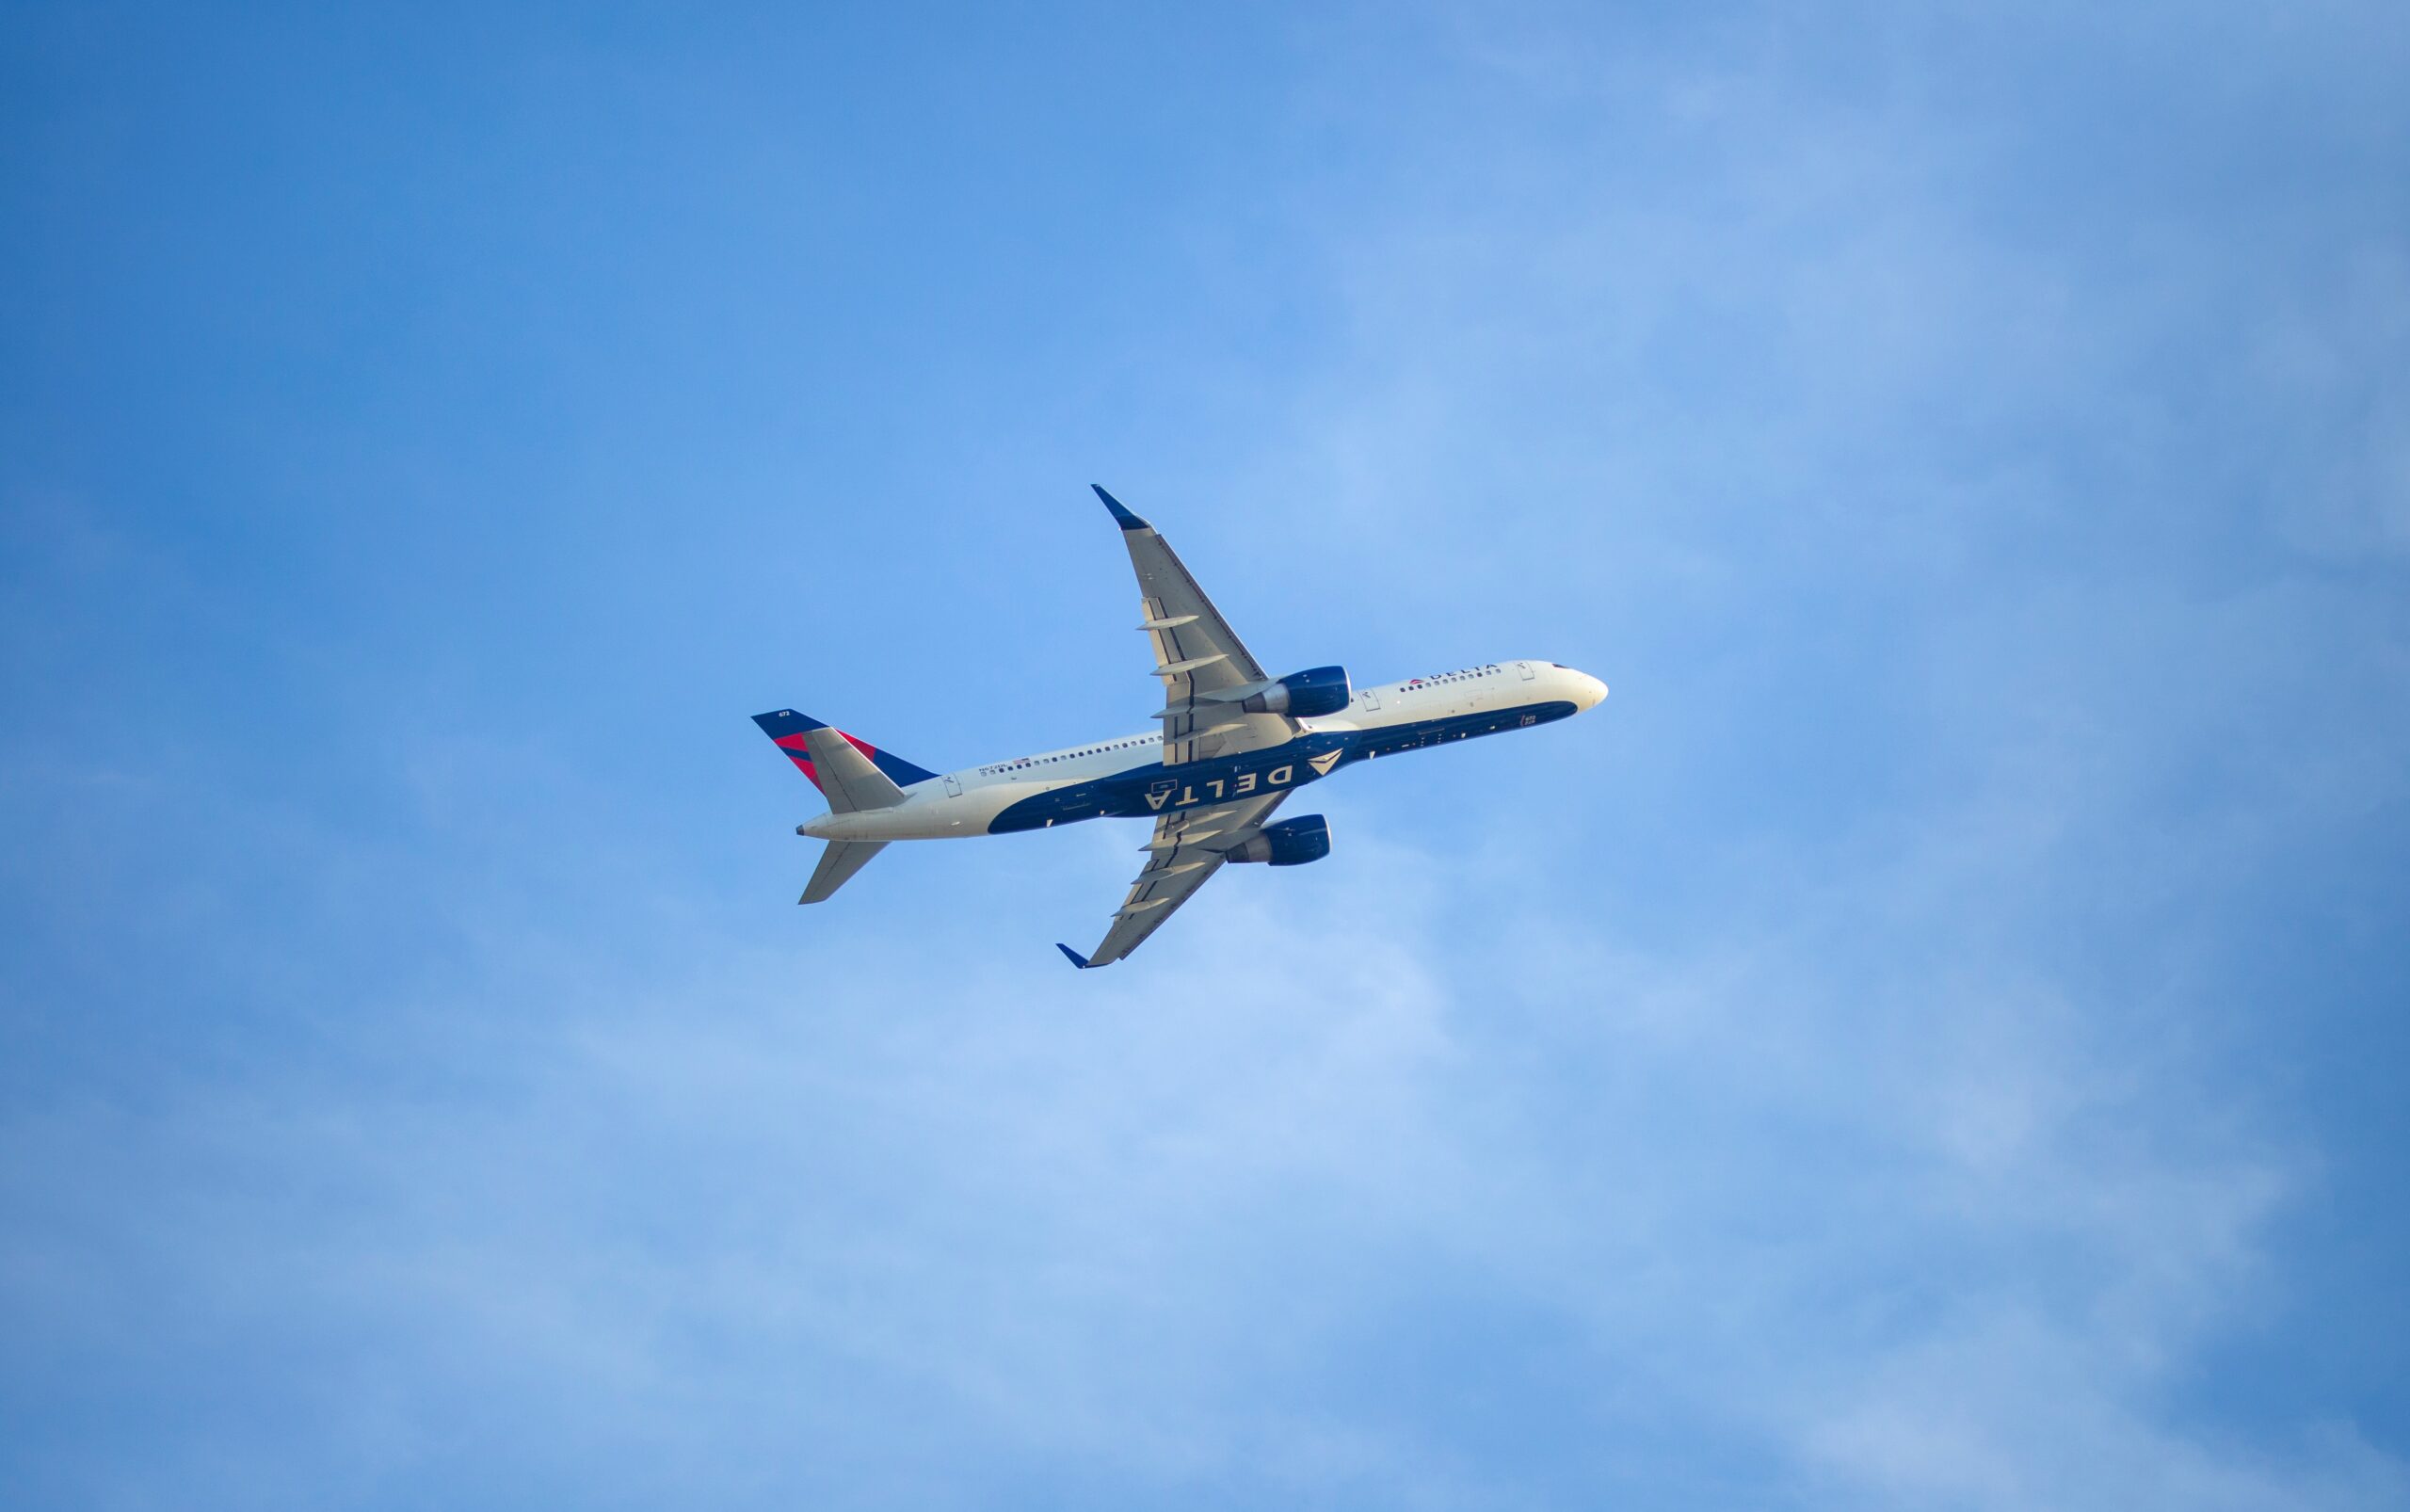 Delta is the best domestic airline that travelers can book. learn more about the airline's perks. 
pictured: a Delta airplane in the bright blue sky